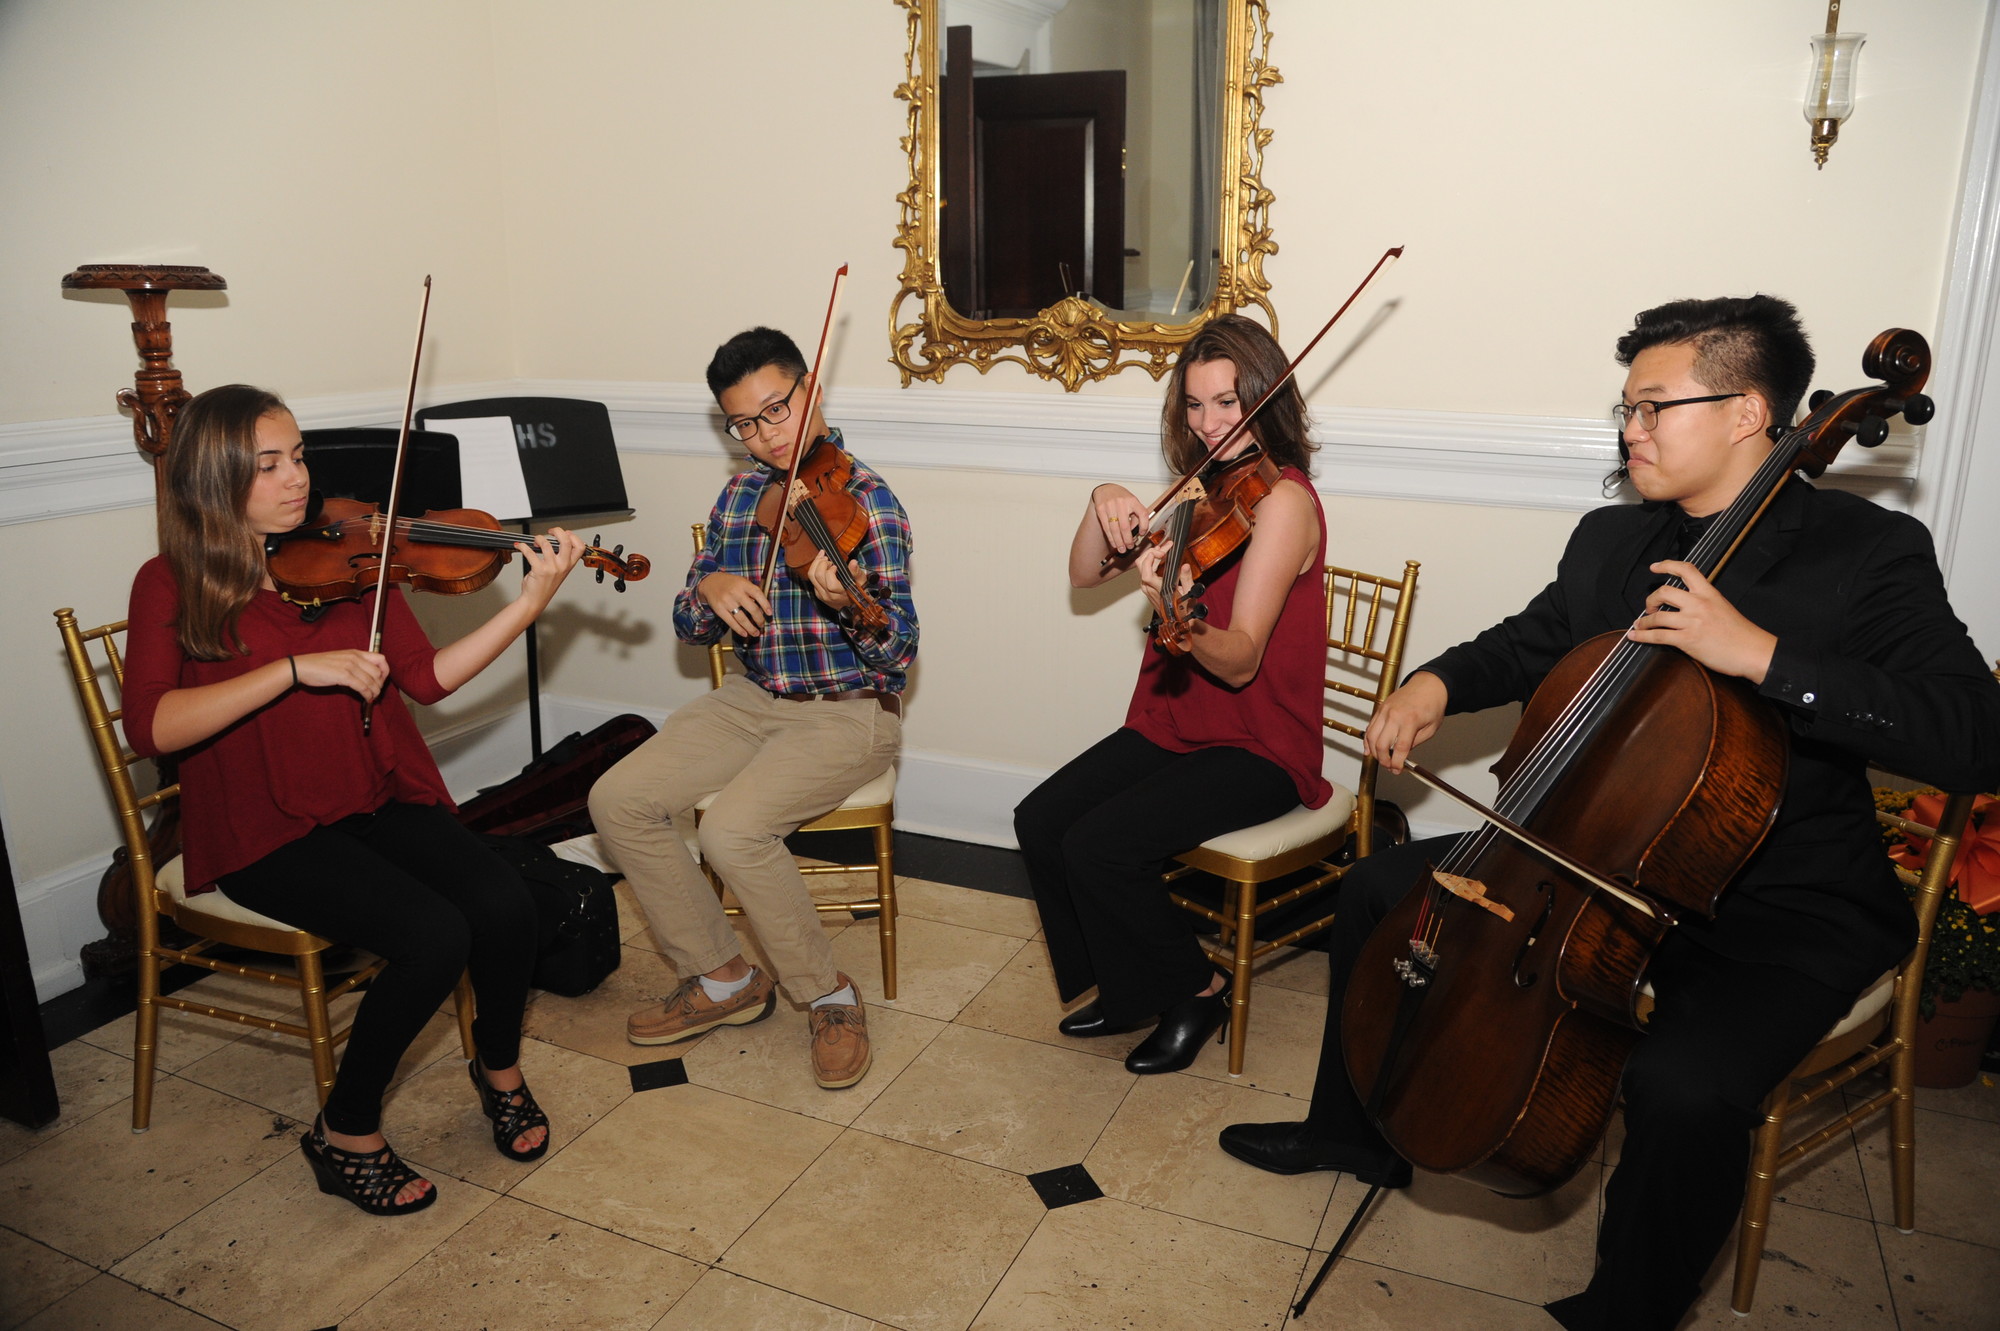 Jolie Rebelo, Edward Park, Alyssa Bydzynski and David Kim, left to right, of the East Meadow High School’s string quartet, serenaded attendees.